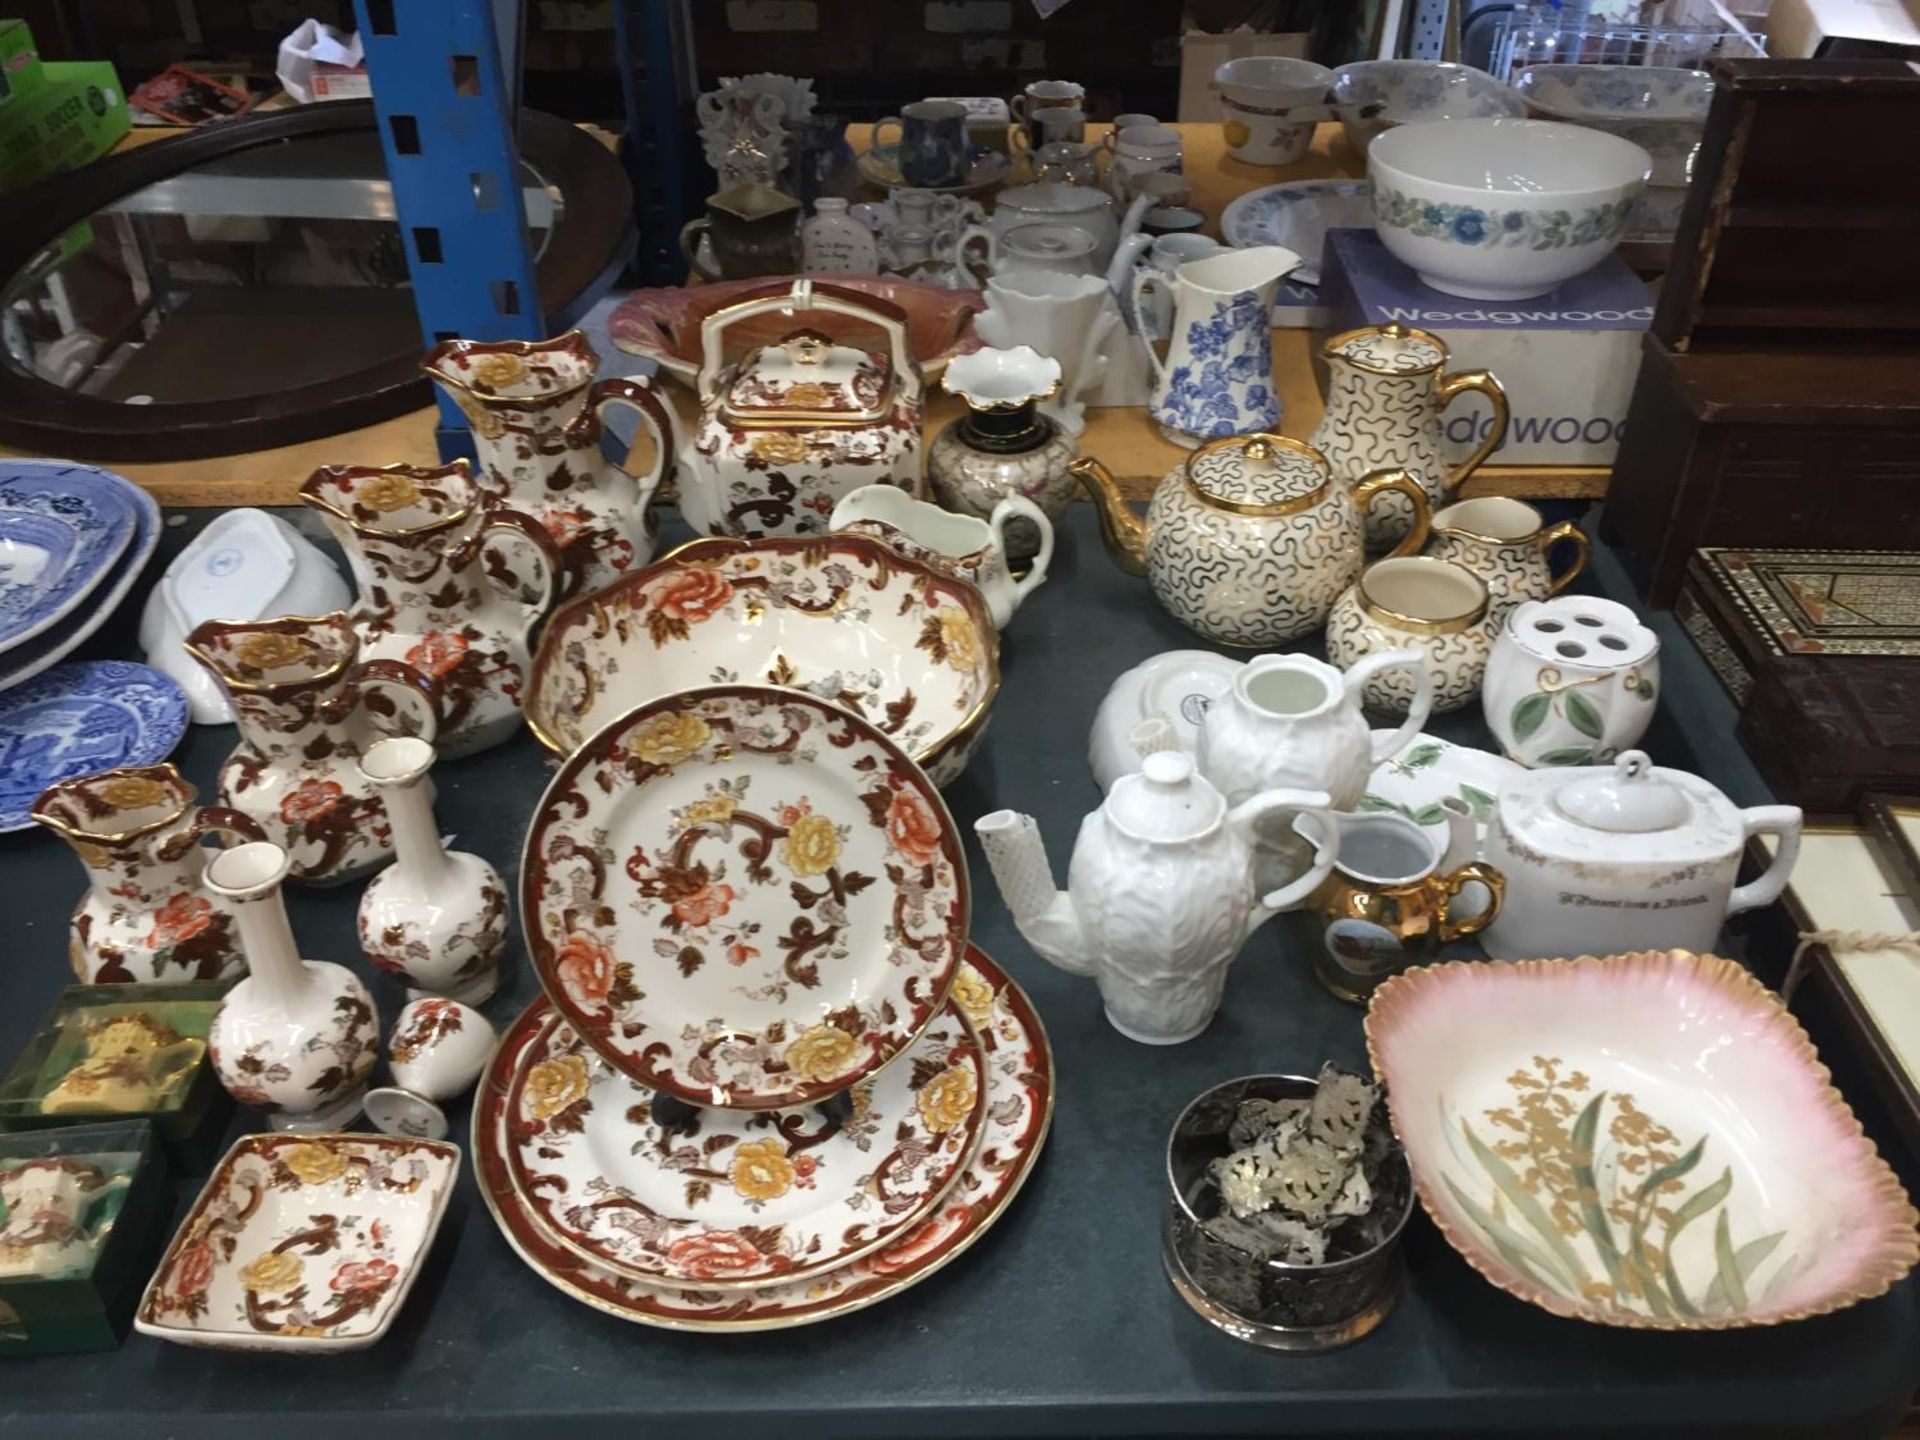 A COLLECTIONS OF MASONS IRONSTONE WARES TO INCLUDE TEAPOT, FRUIT BOWL, GRADUATED JUGS, PLATES ALSO